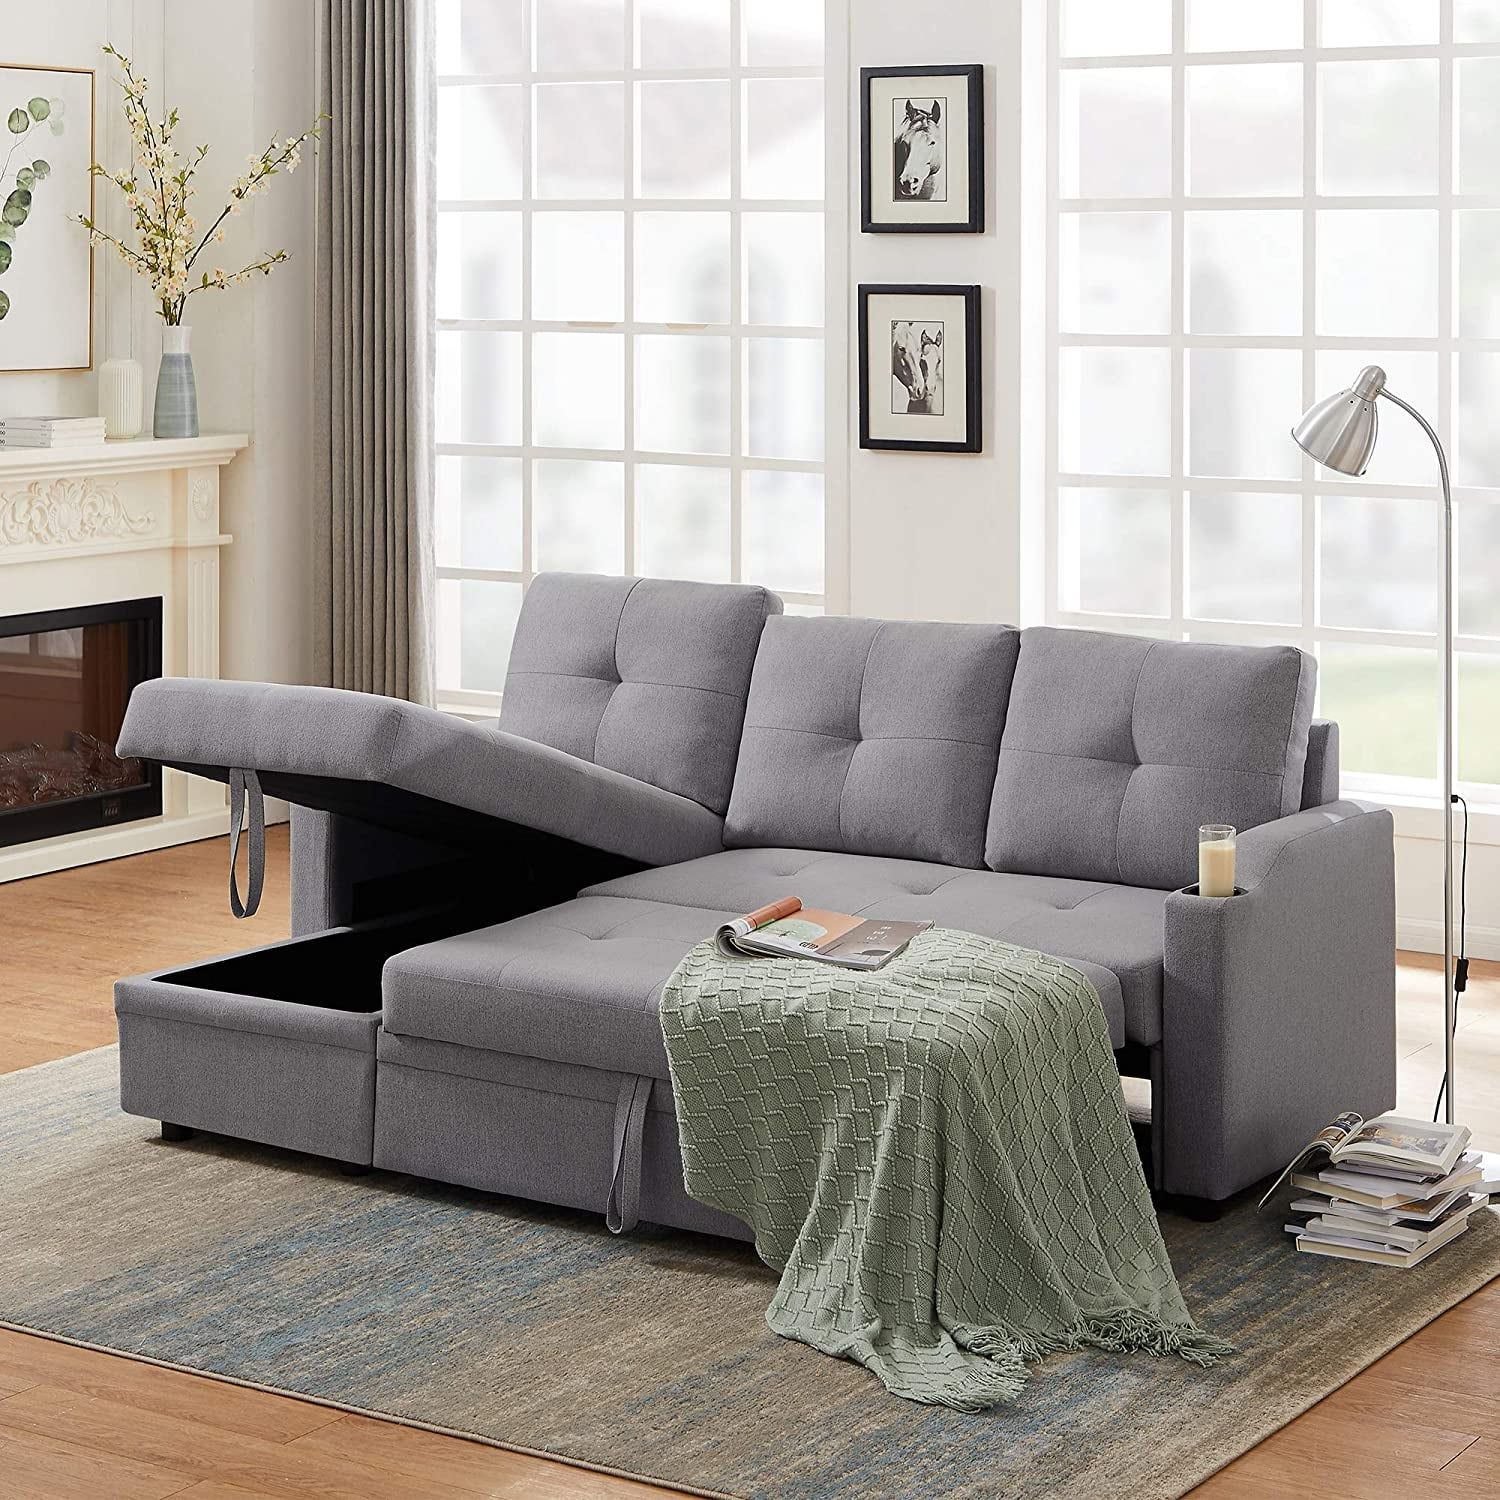 Best And Most Comfortable Sofas With Storage 2022 | Popsugar Home With Regard To Sofa Sectionals With Storage (View 9 of 15)